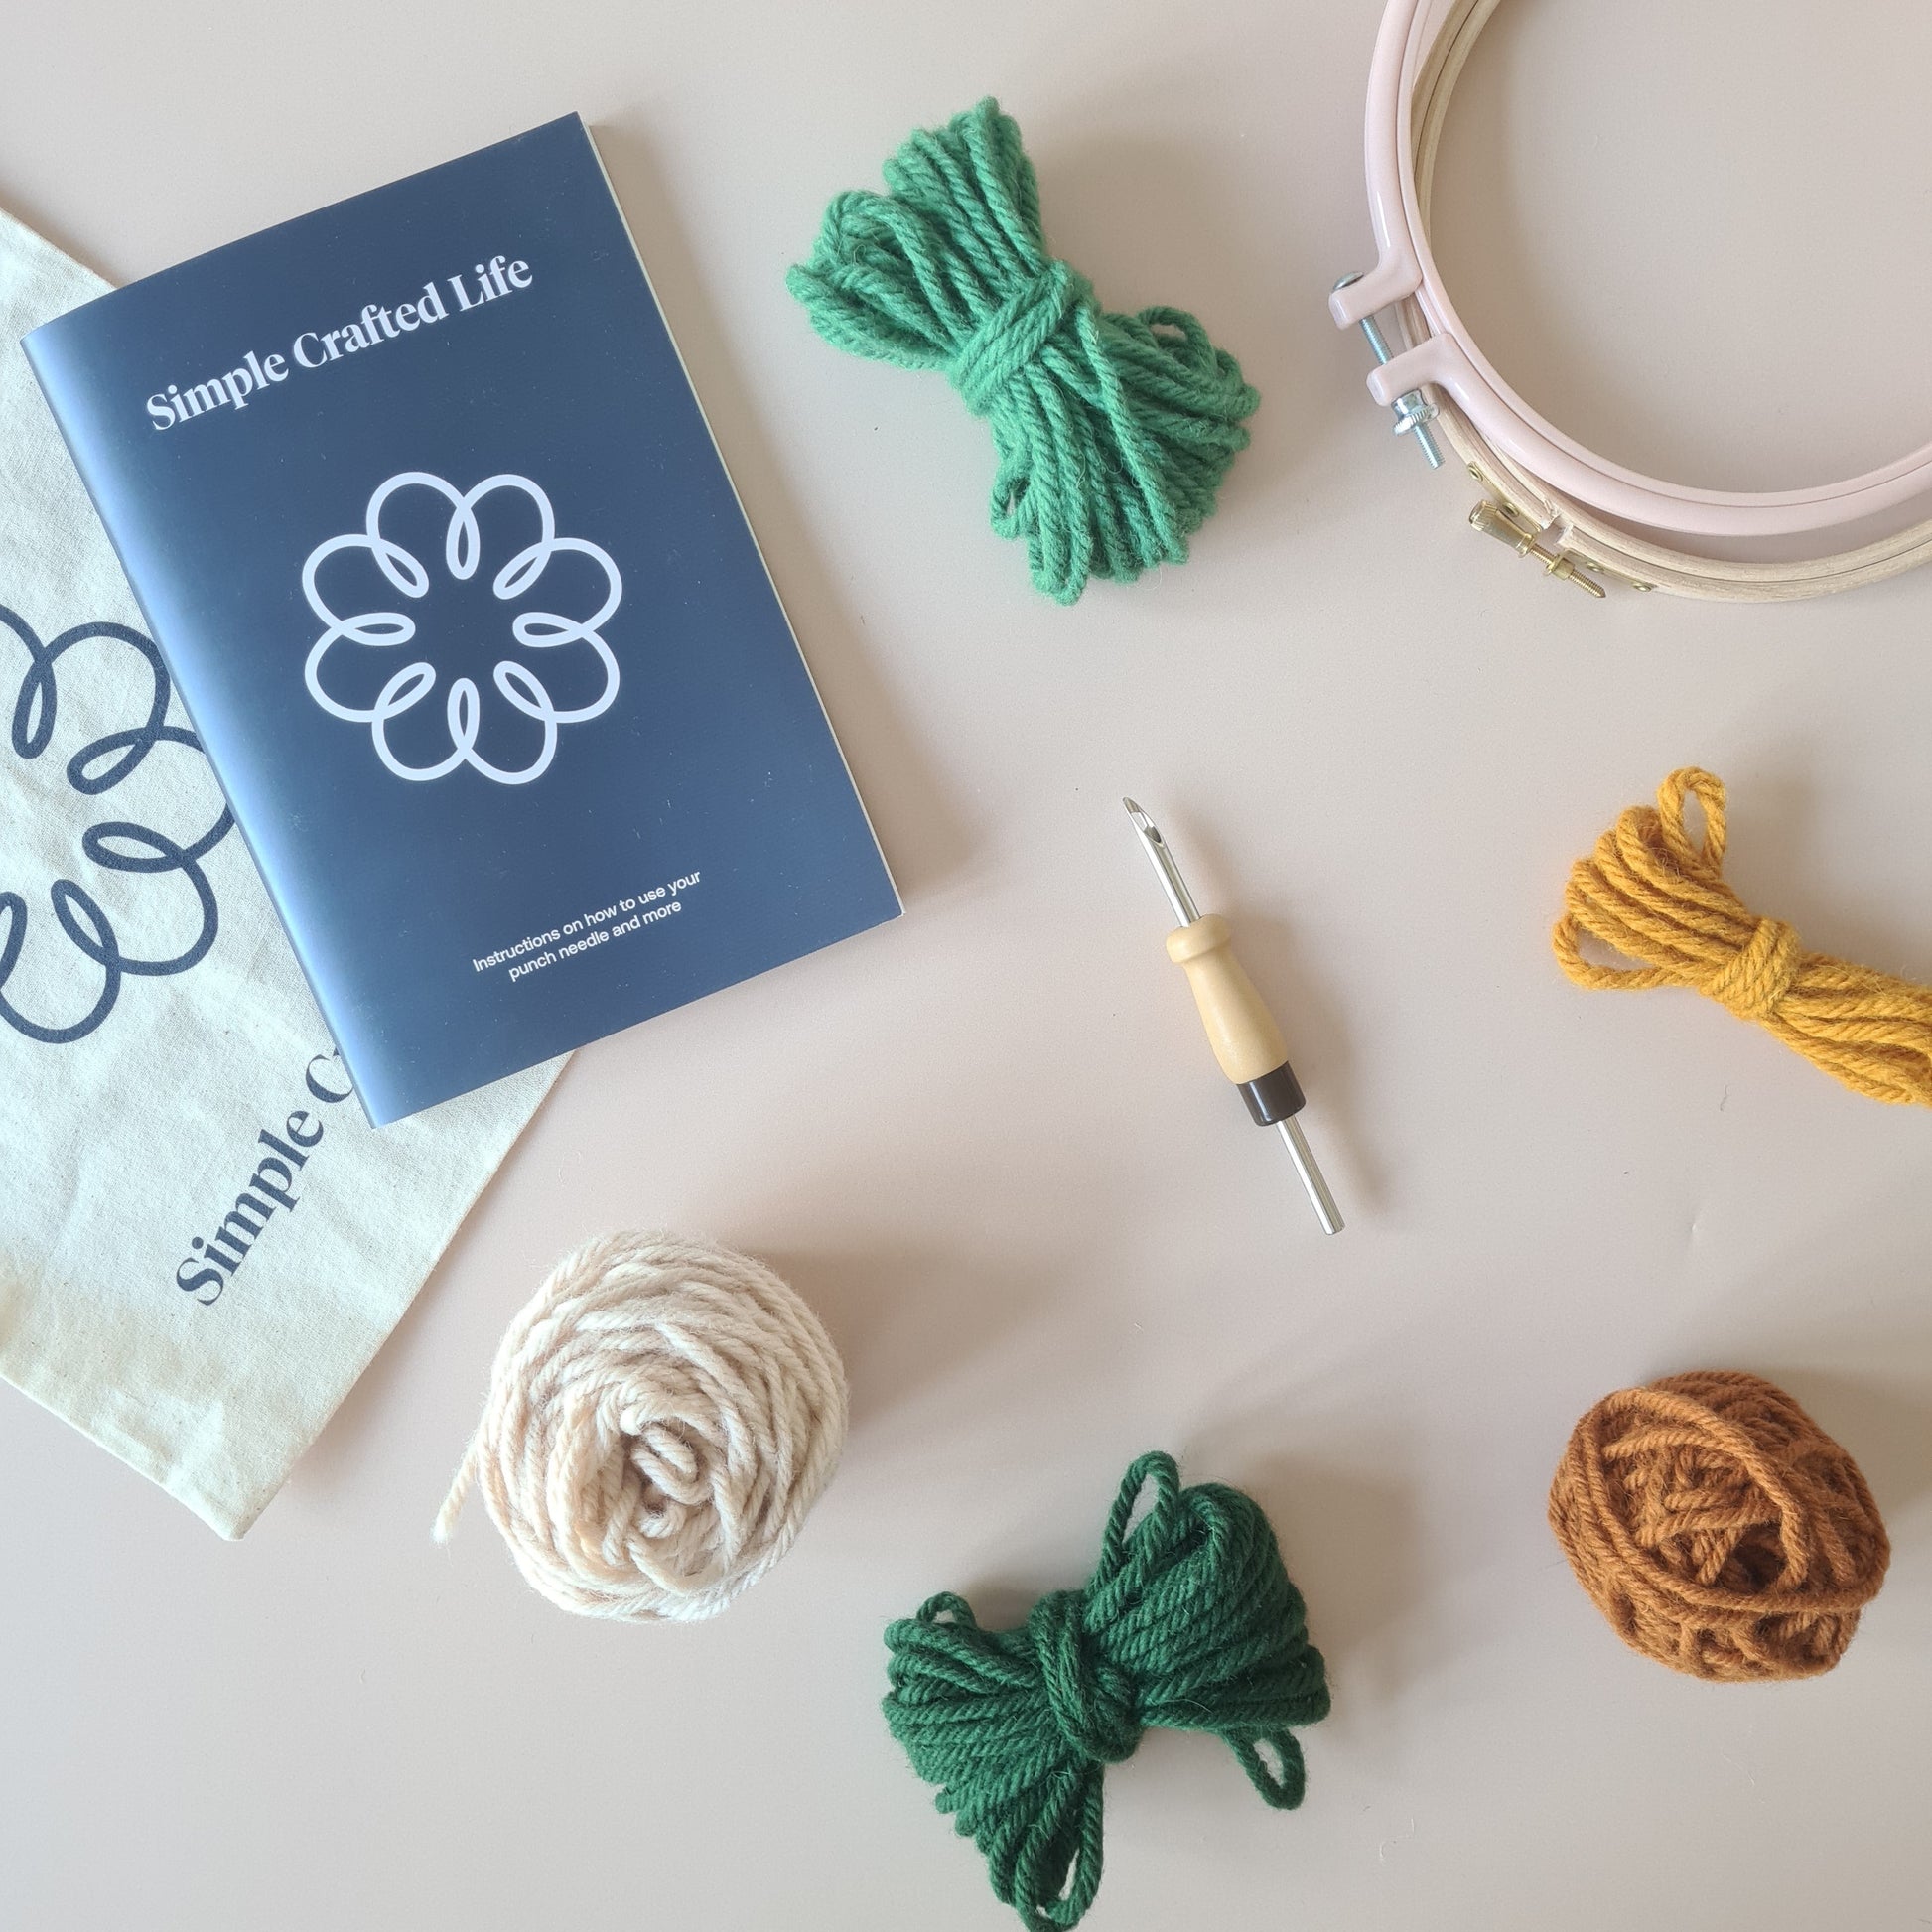 How to Punch Needle? The Ultimate Beginner's Guide – Paint With Yarn